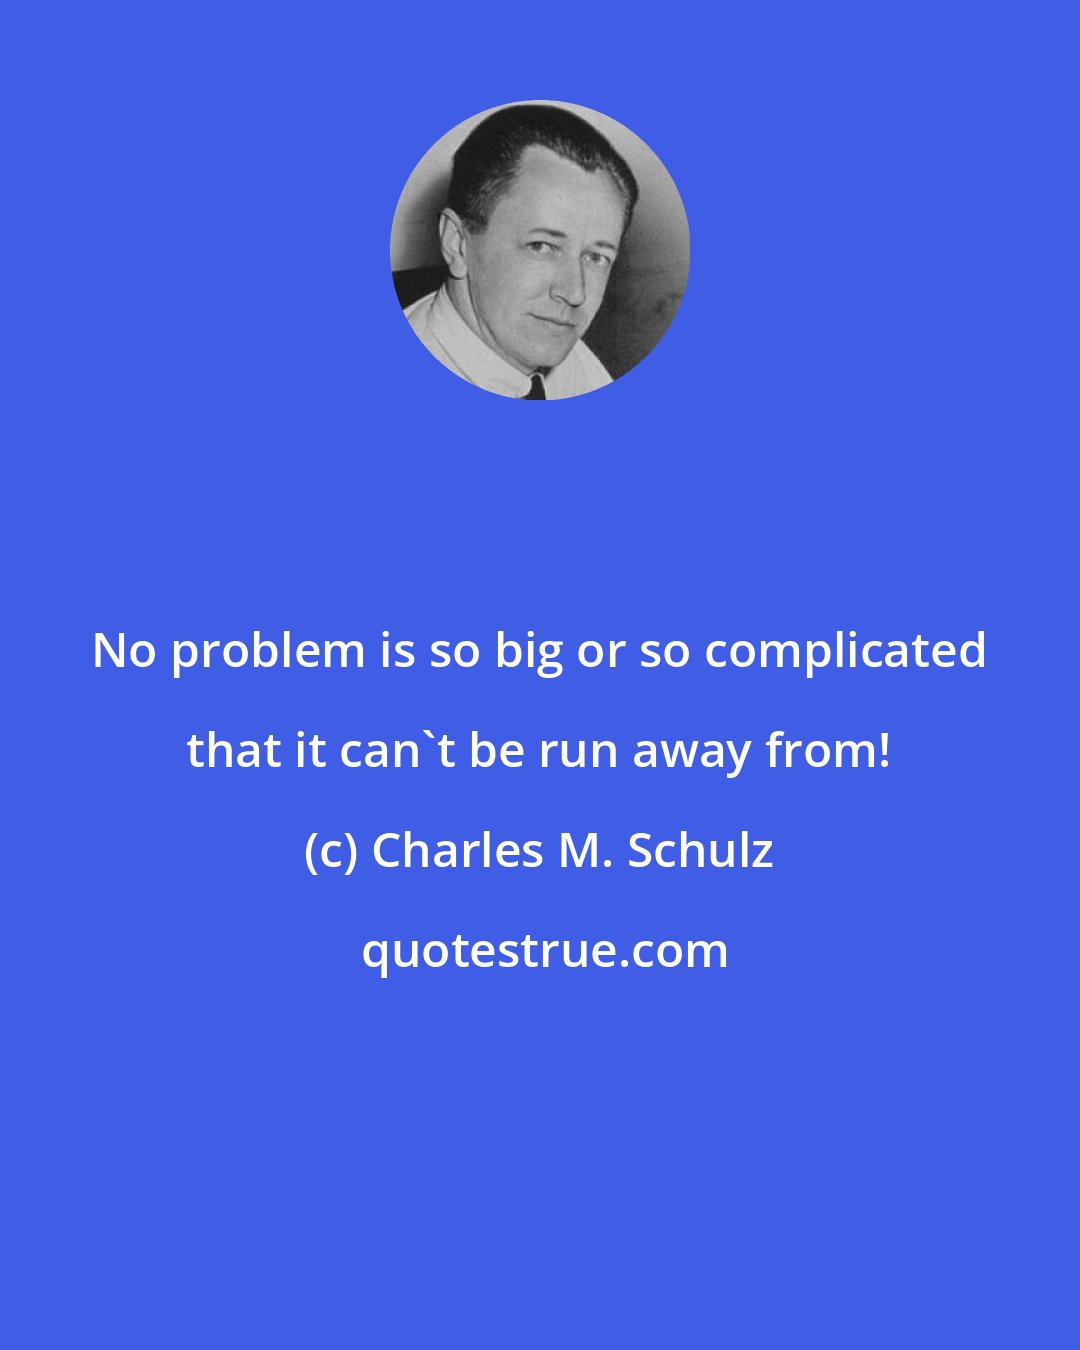 Charles M. Schulz: No problem is so big or so complicated that it can't be run away from!